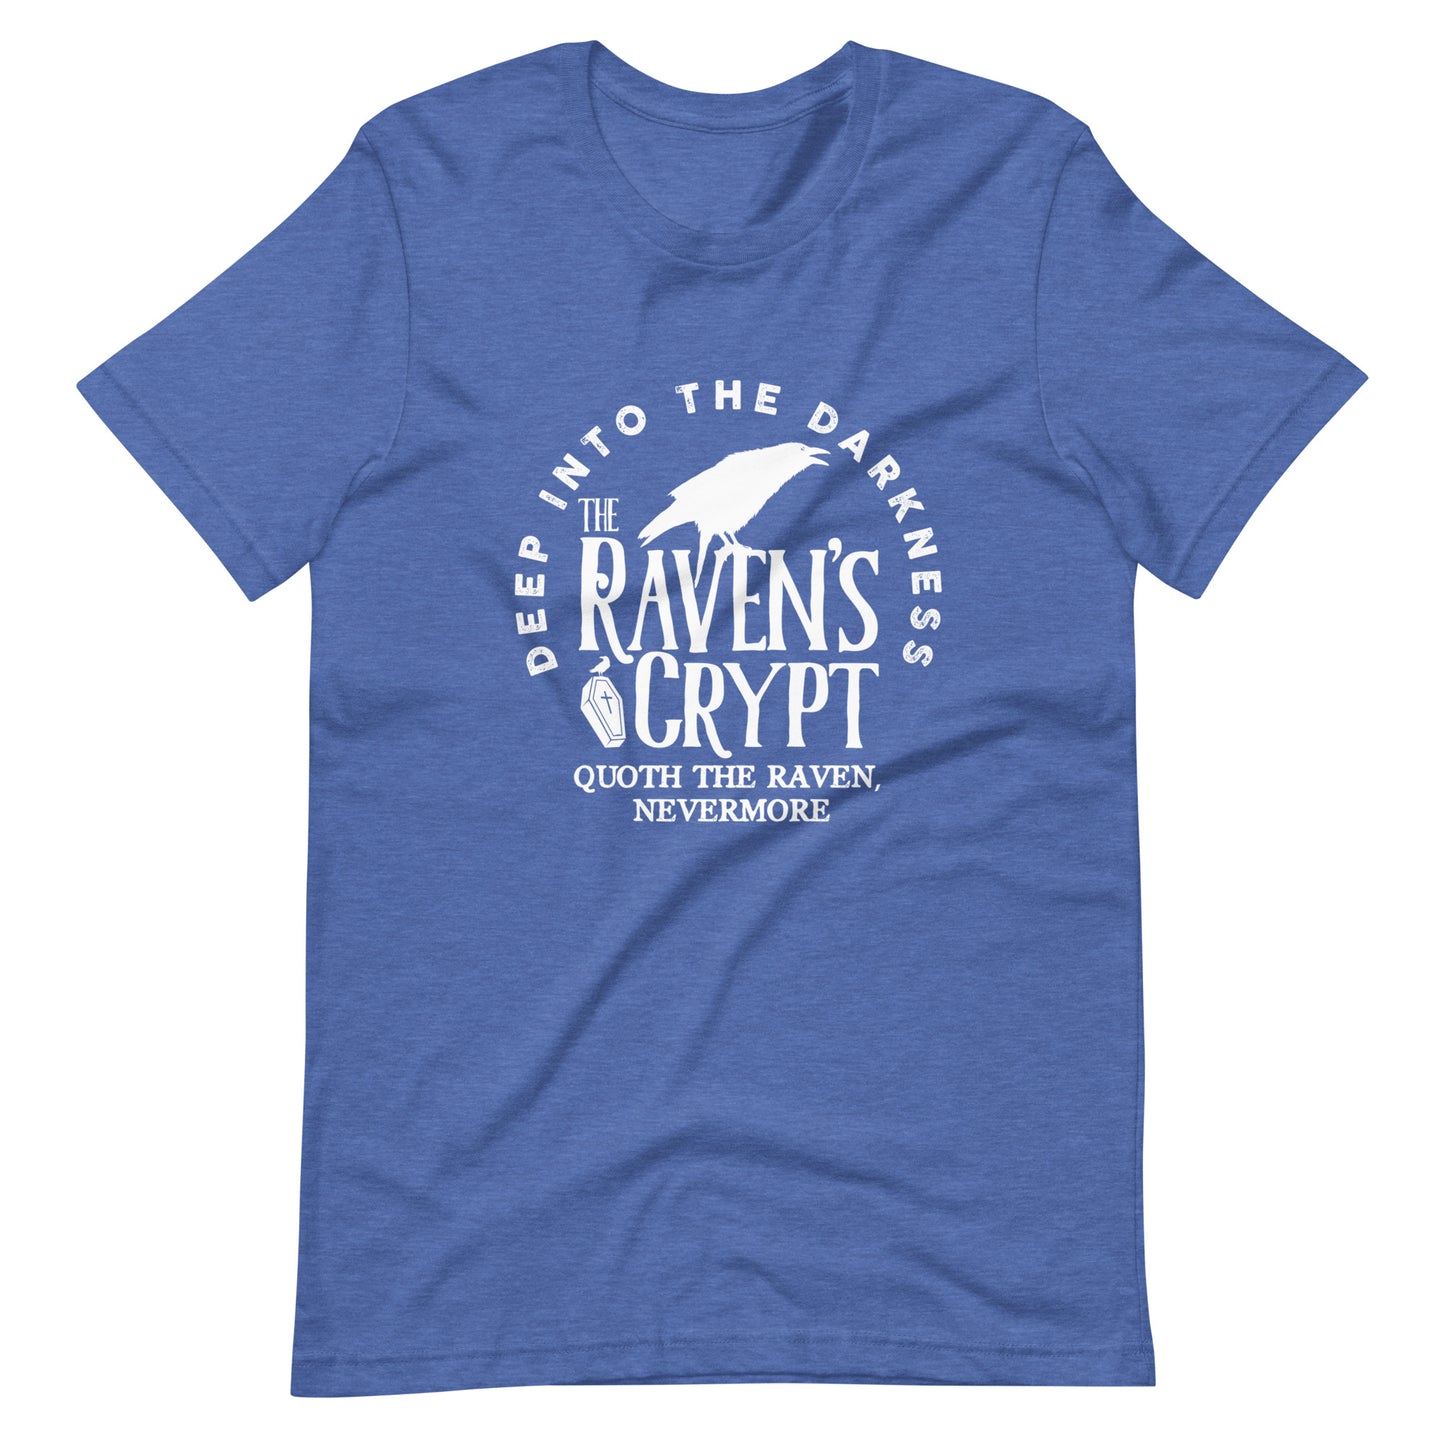 Deep Into the Darkness The Raven's Crypt - Men's t-shirt